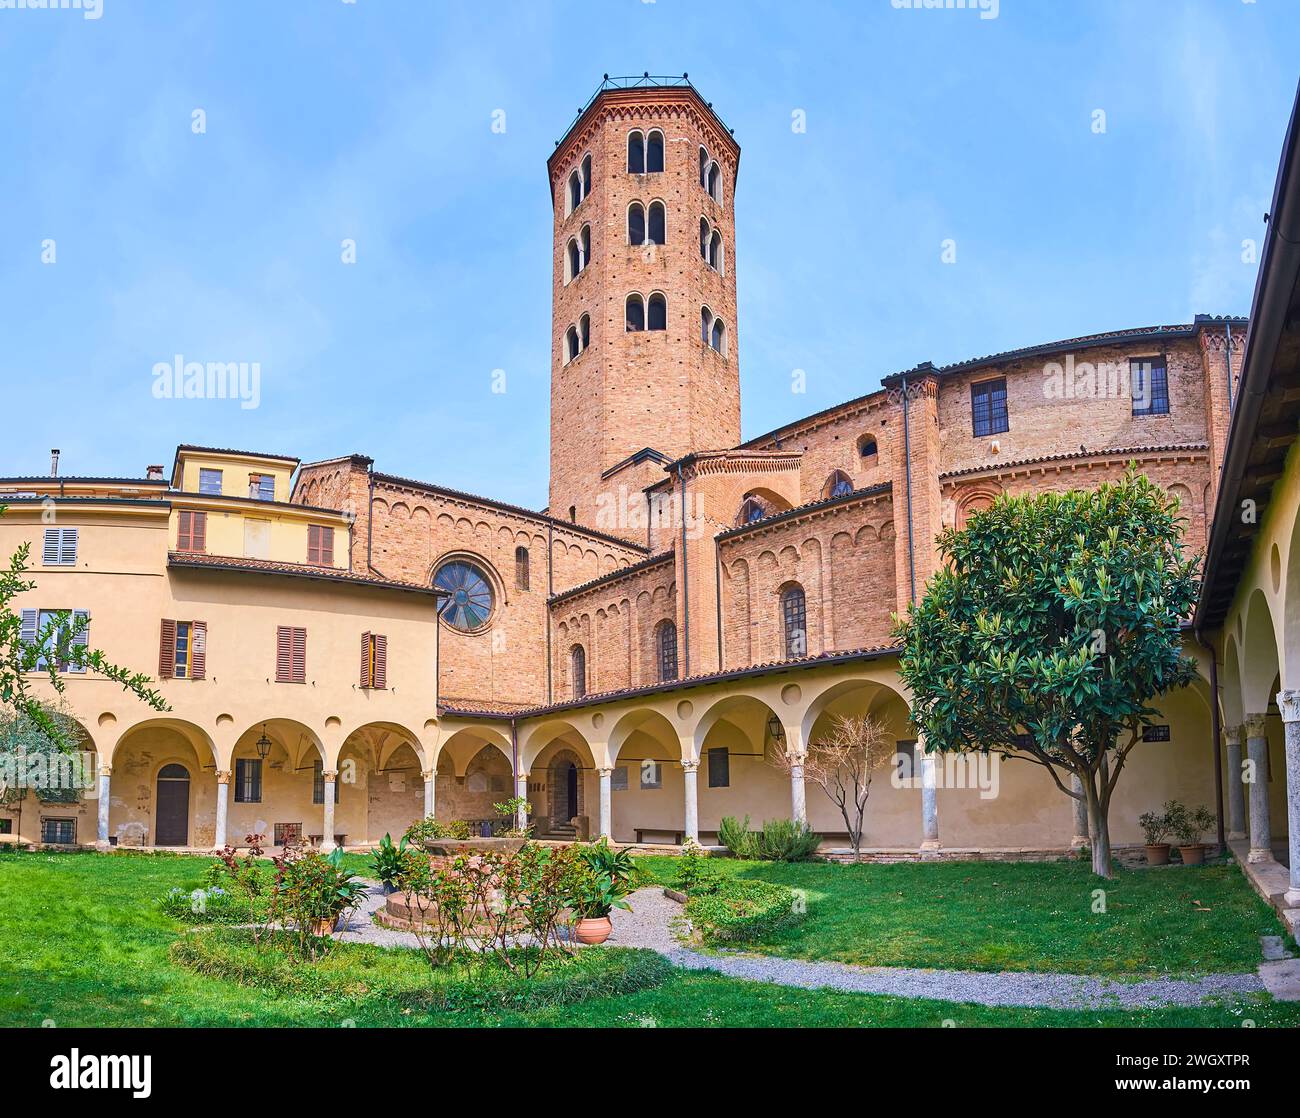 The small scenic medieval courtyard of St Antoninus Basilica with a nice green garden, arched galleries and a view on campanile (bell tower) of the ch Stock Photo